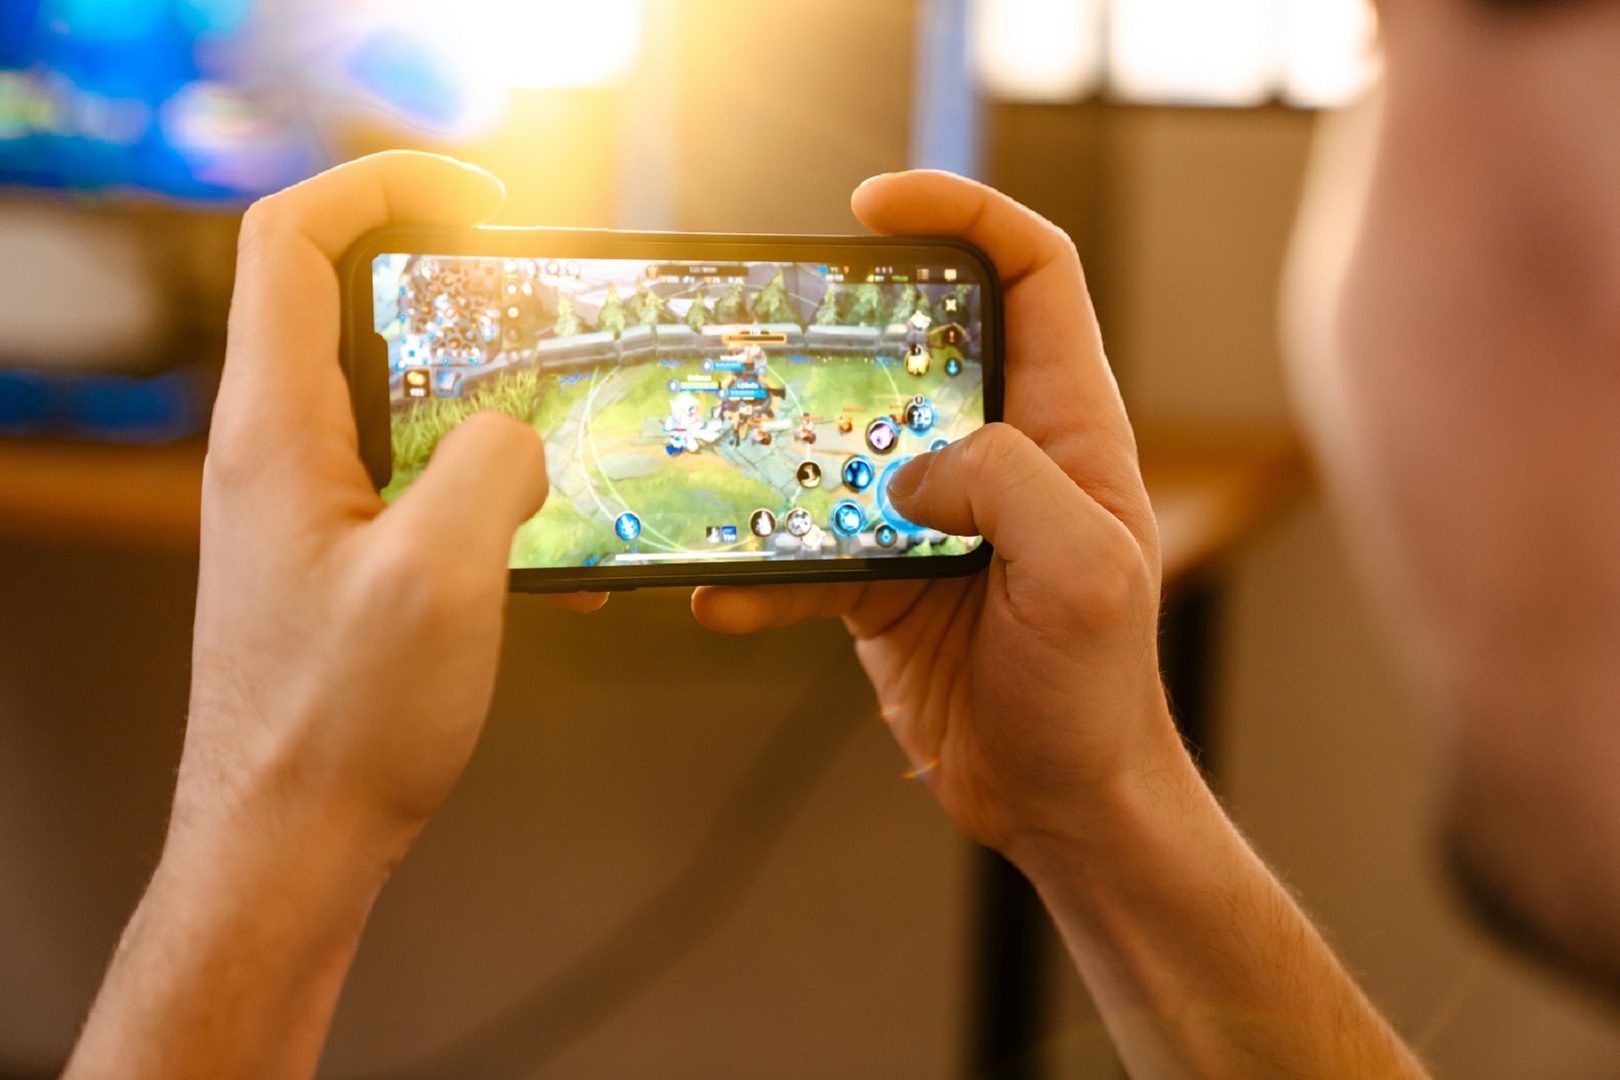 5G for Innovation in the Mobile Gaming Industry